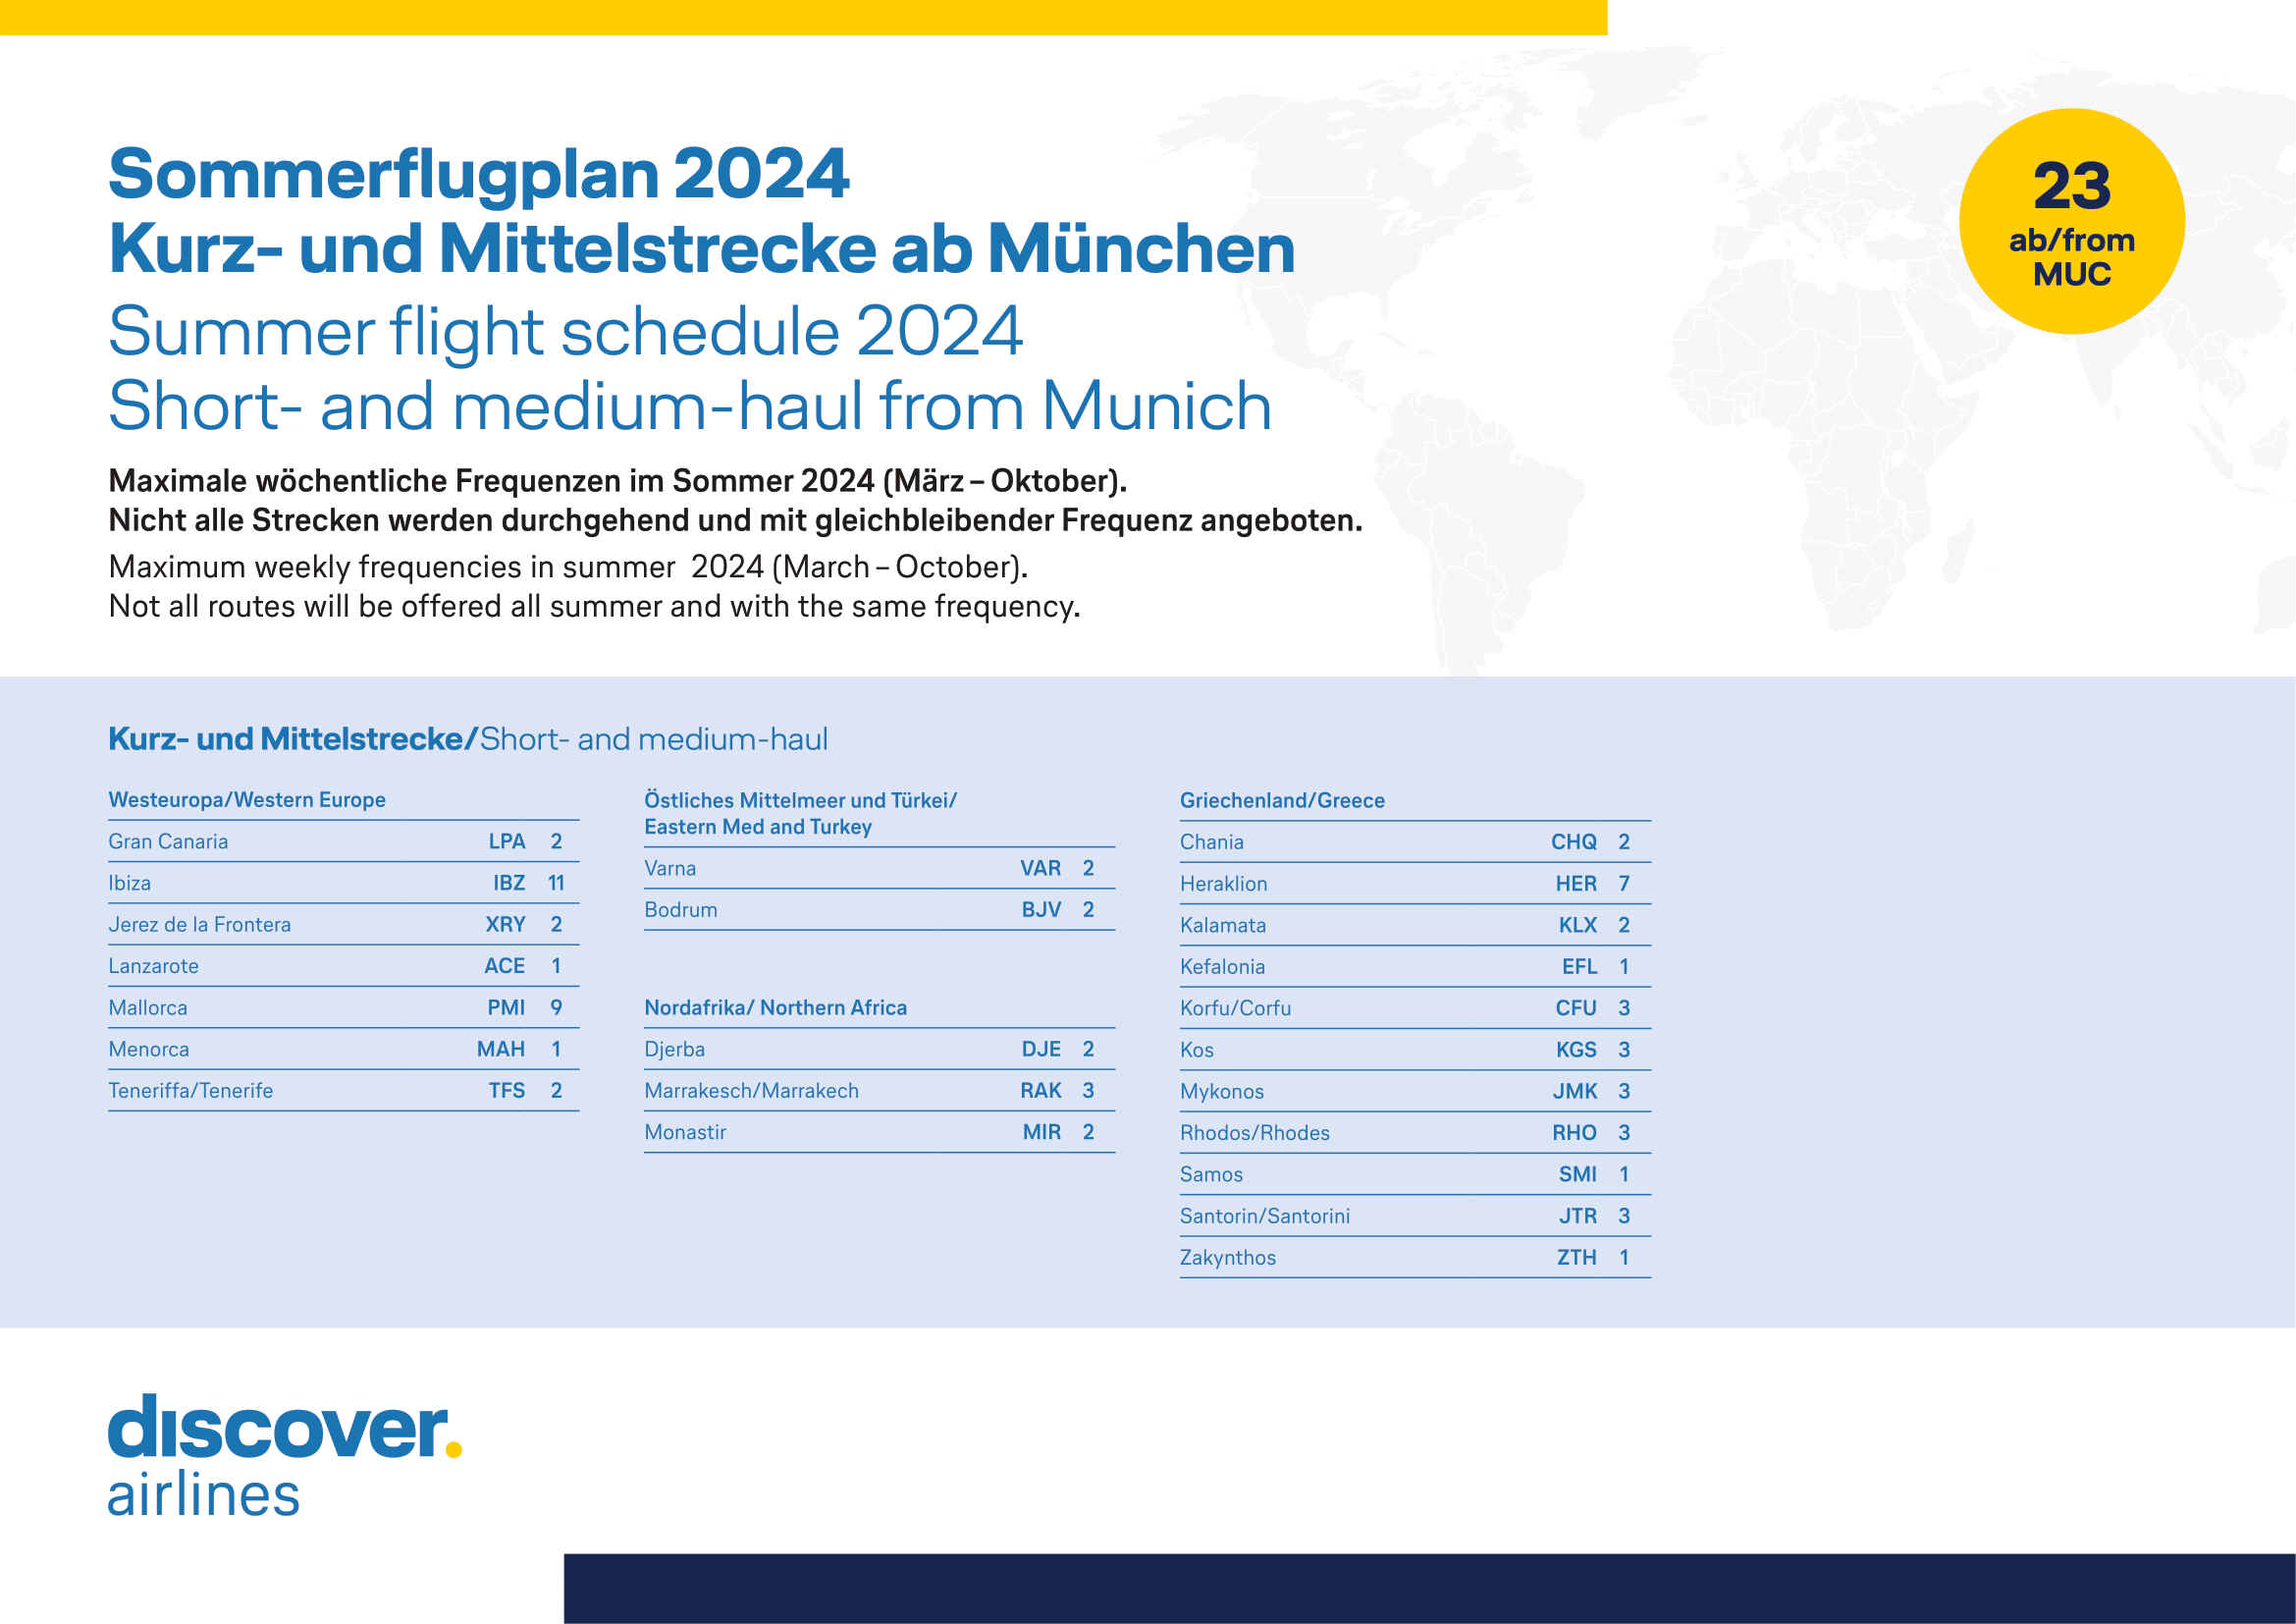 Discover Airlines München